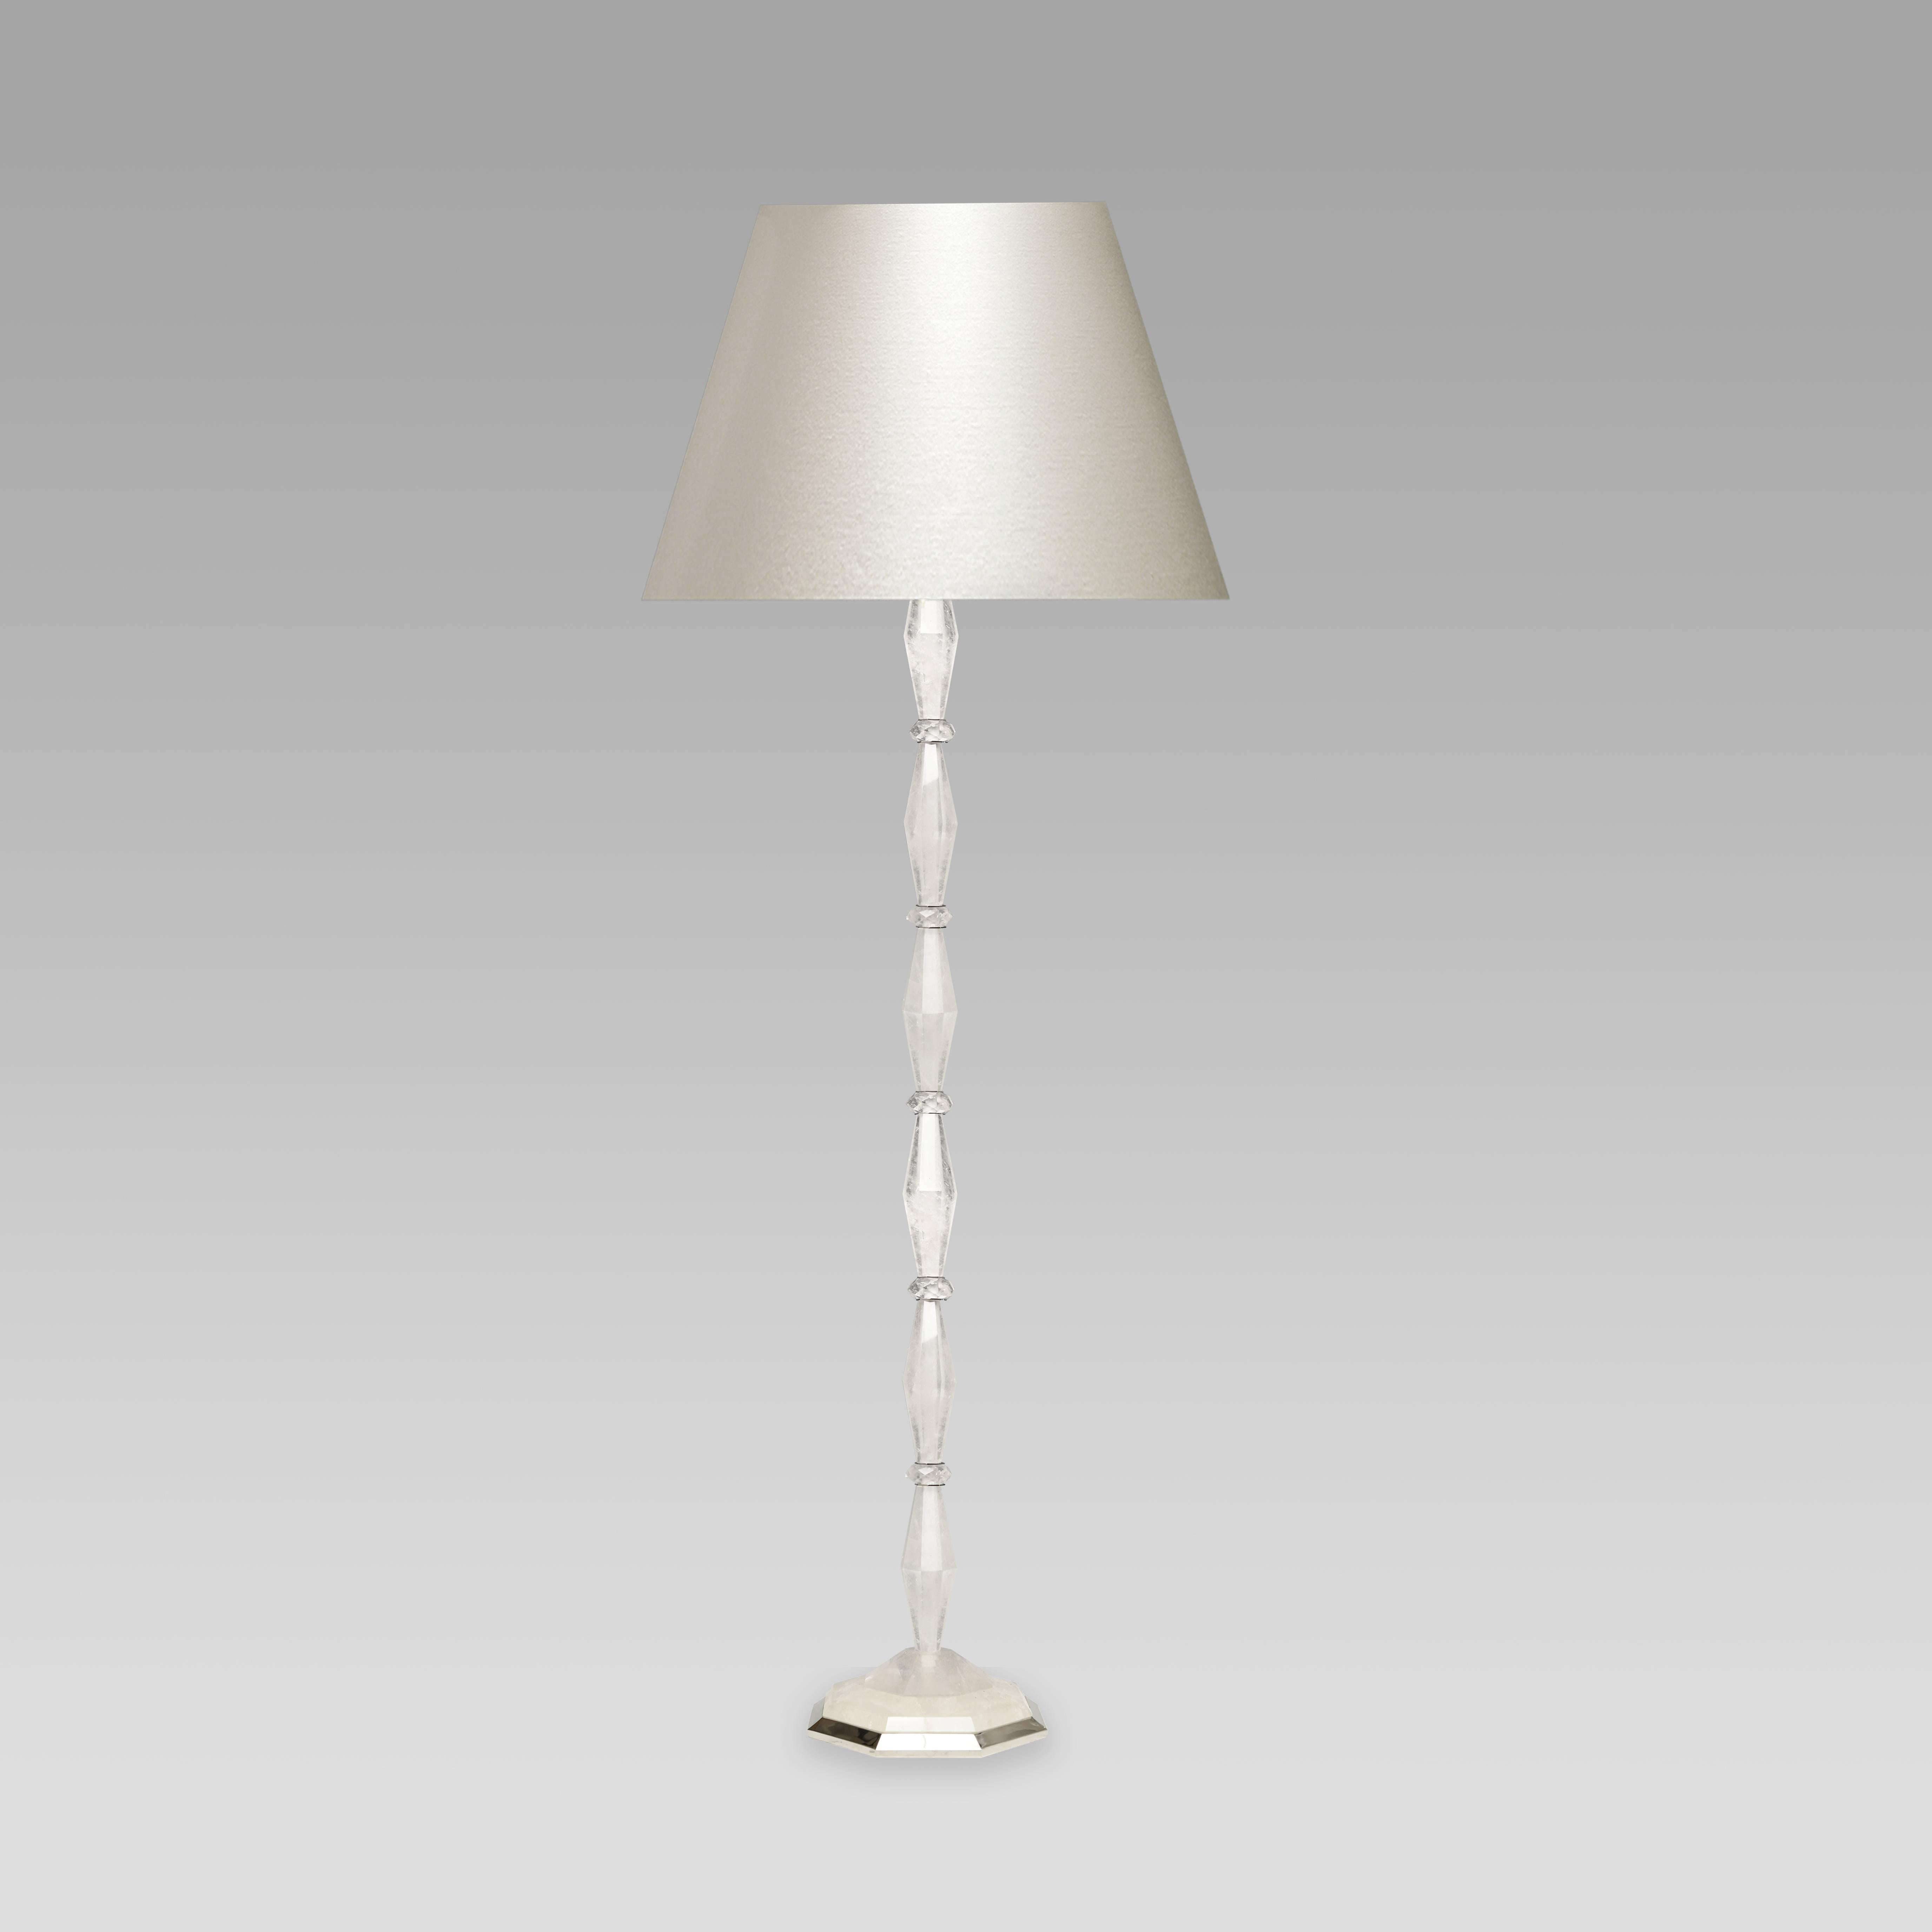 A carved diamond form rock crystal quartz floor lamp with nickel base, created by Phoenix Gallery, NYC.
Measure: To the rock crystal 56 inch H.
(Lampshade not included).
